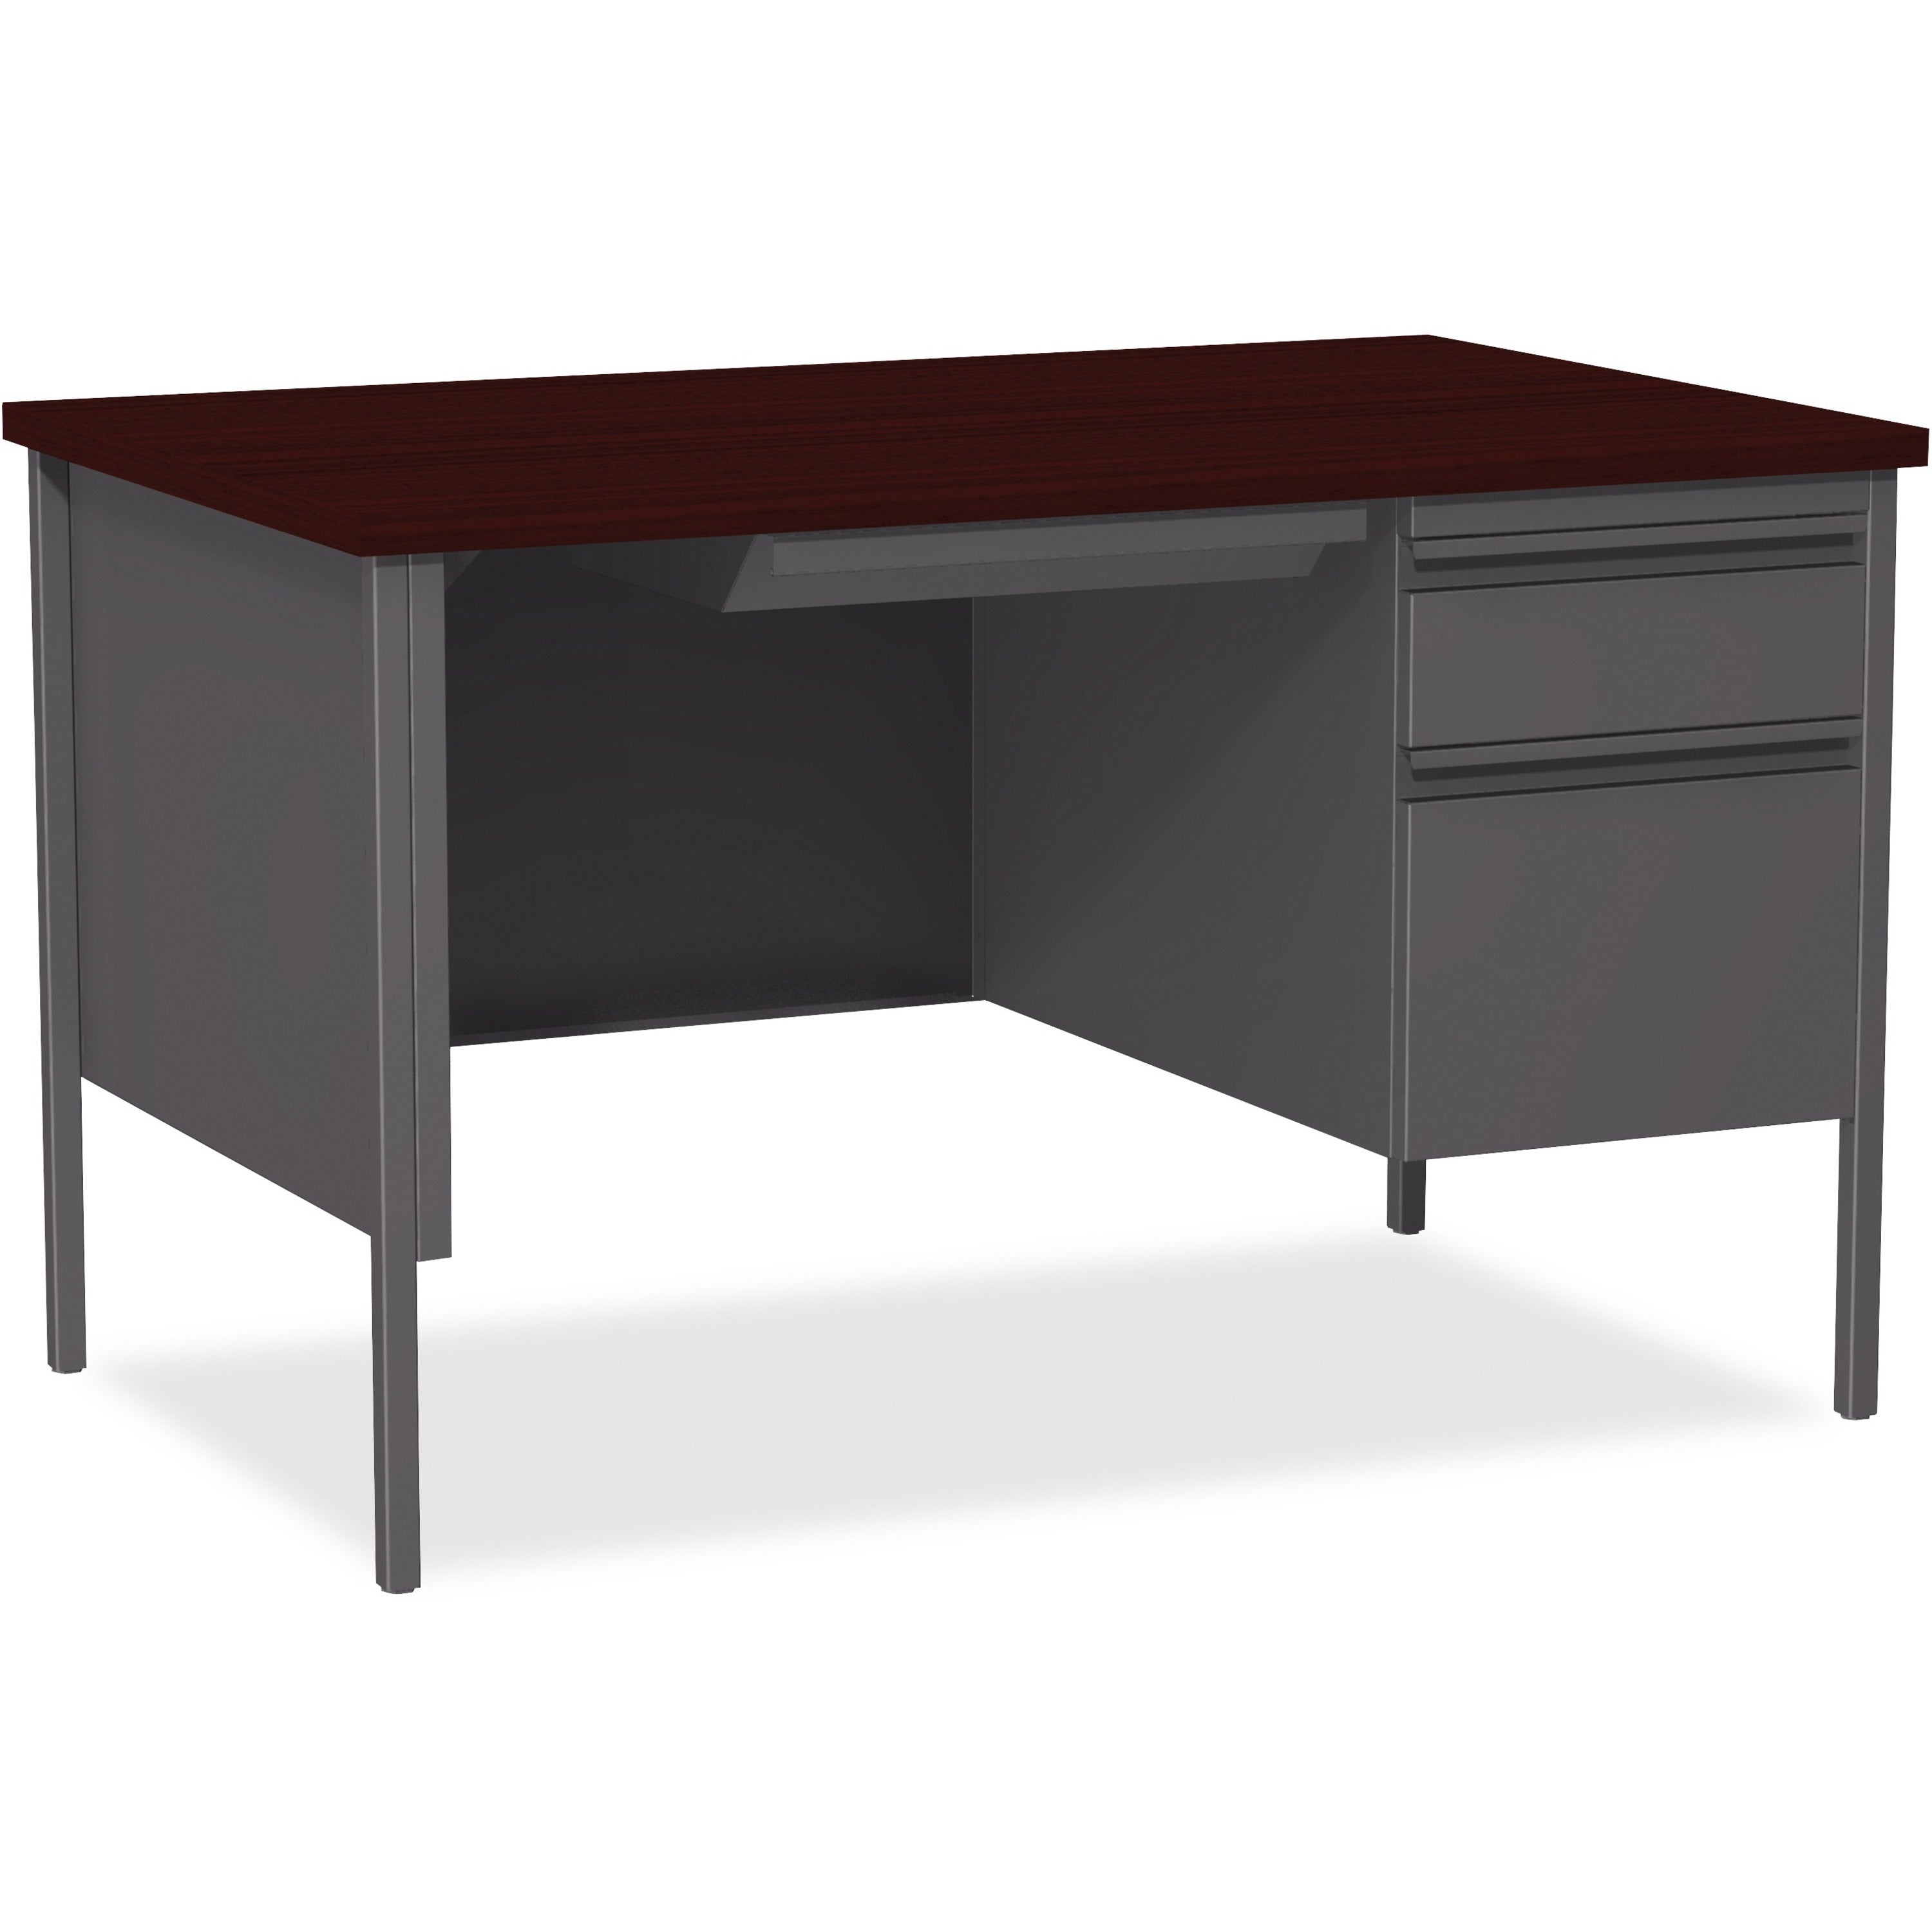 lorell-fortress-series-48-right-single-pedestal-desk-for-table-toplaminated-rectangle-mahogany-top-30-table-top-length-x-48-table-top-width-x-113-table-top-thickness-2950-height-assembly-required-mahogany-steel-1-each_llr66903 - 1